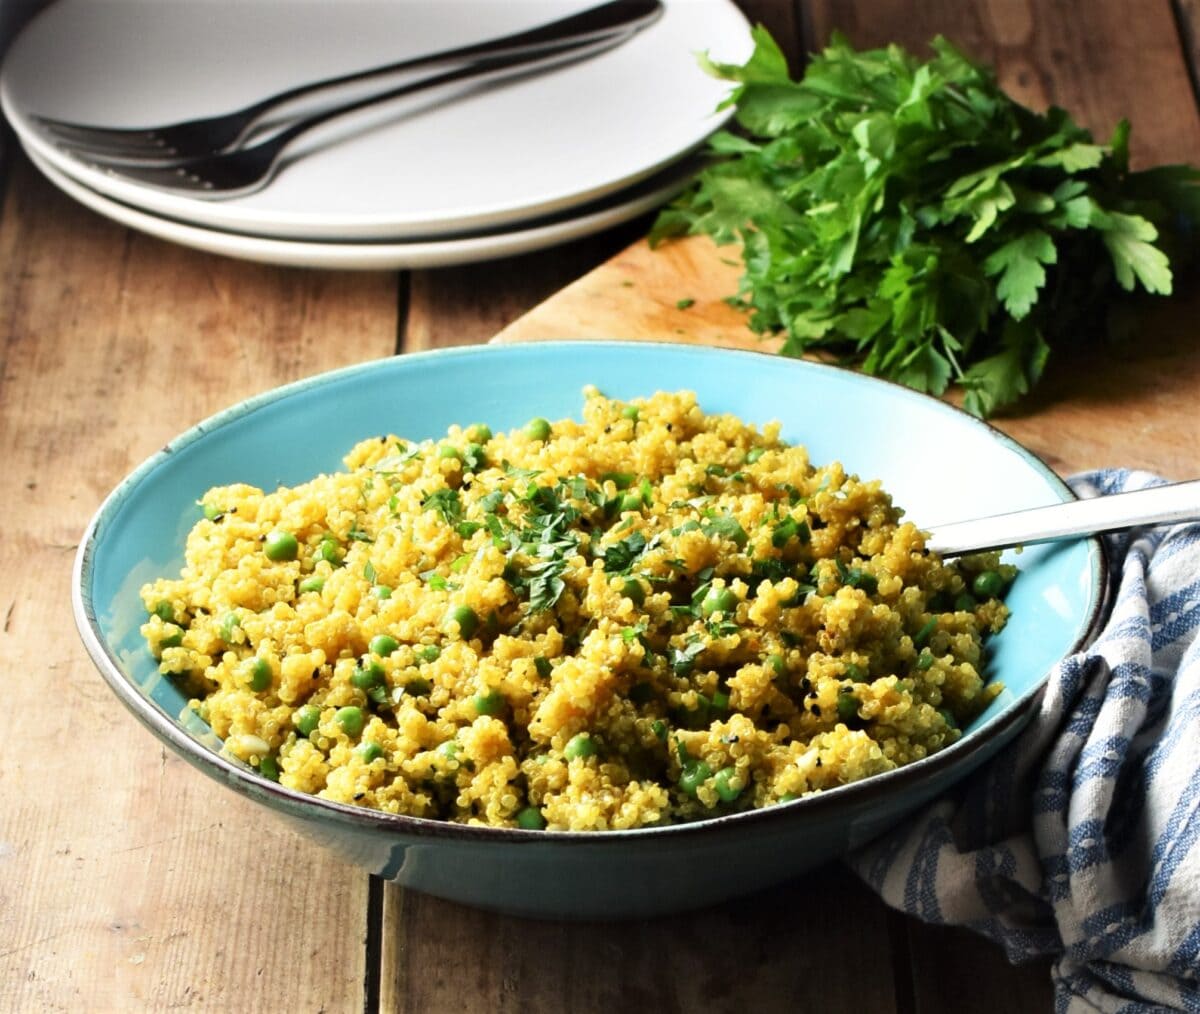 Close-up view of curried quinoa with peas in blue bowl with spoon, 2 white plates with forks and fresh herbs in background.